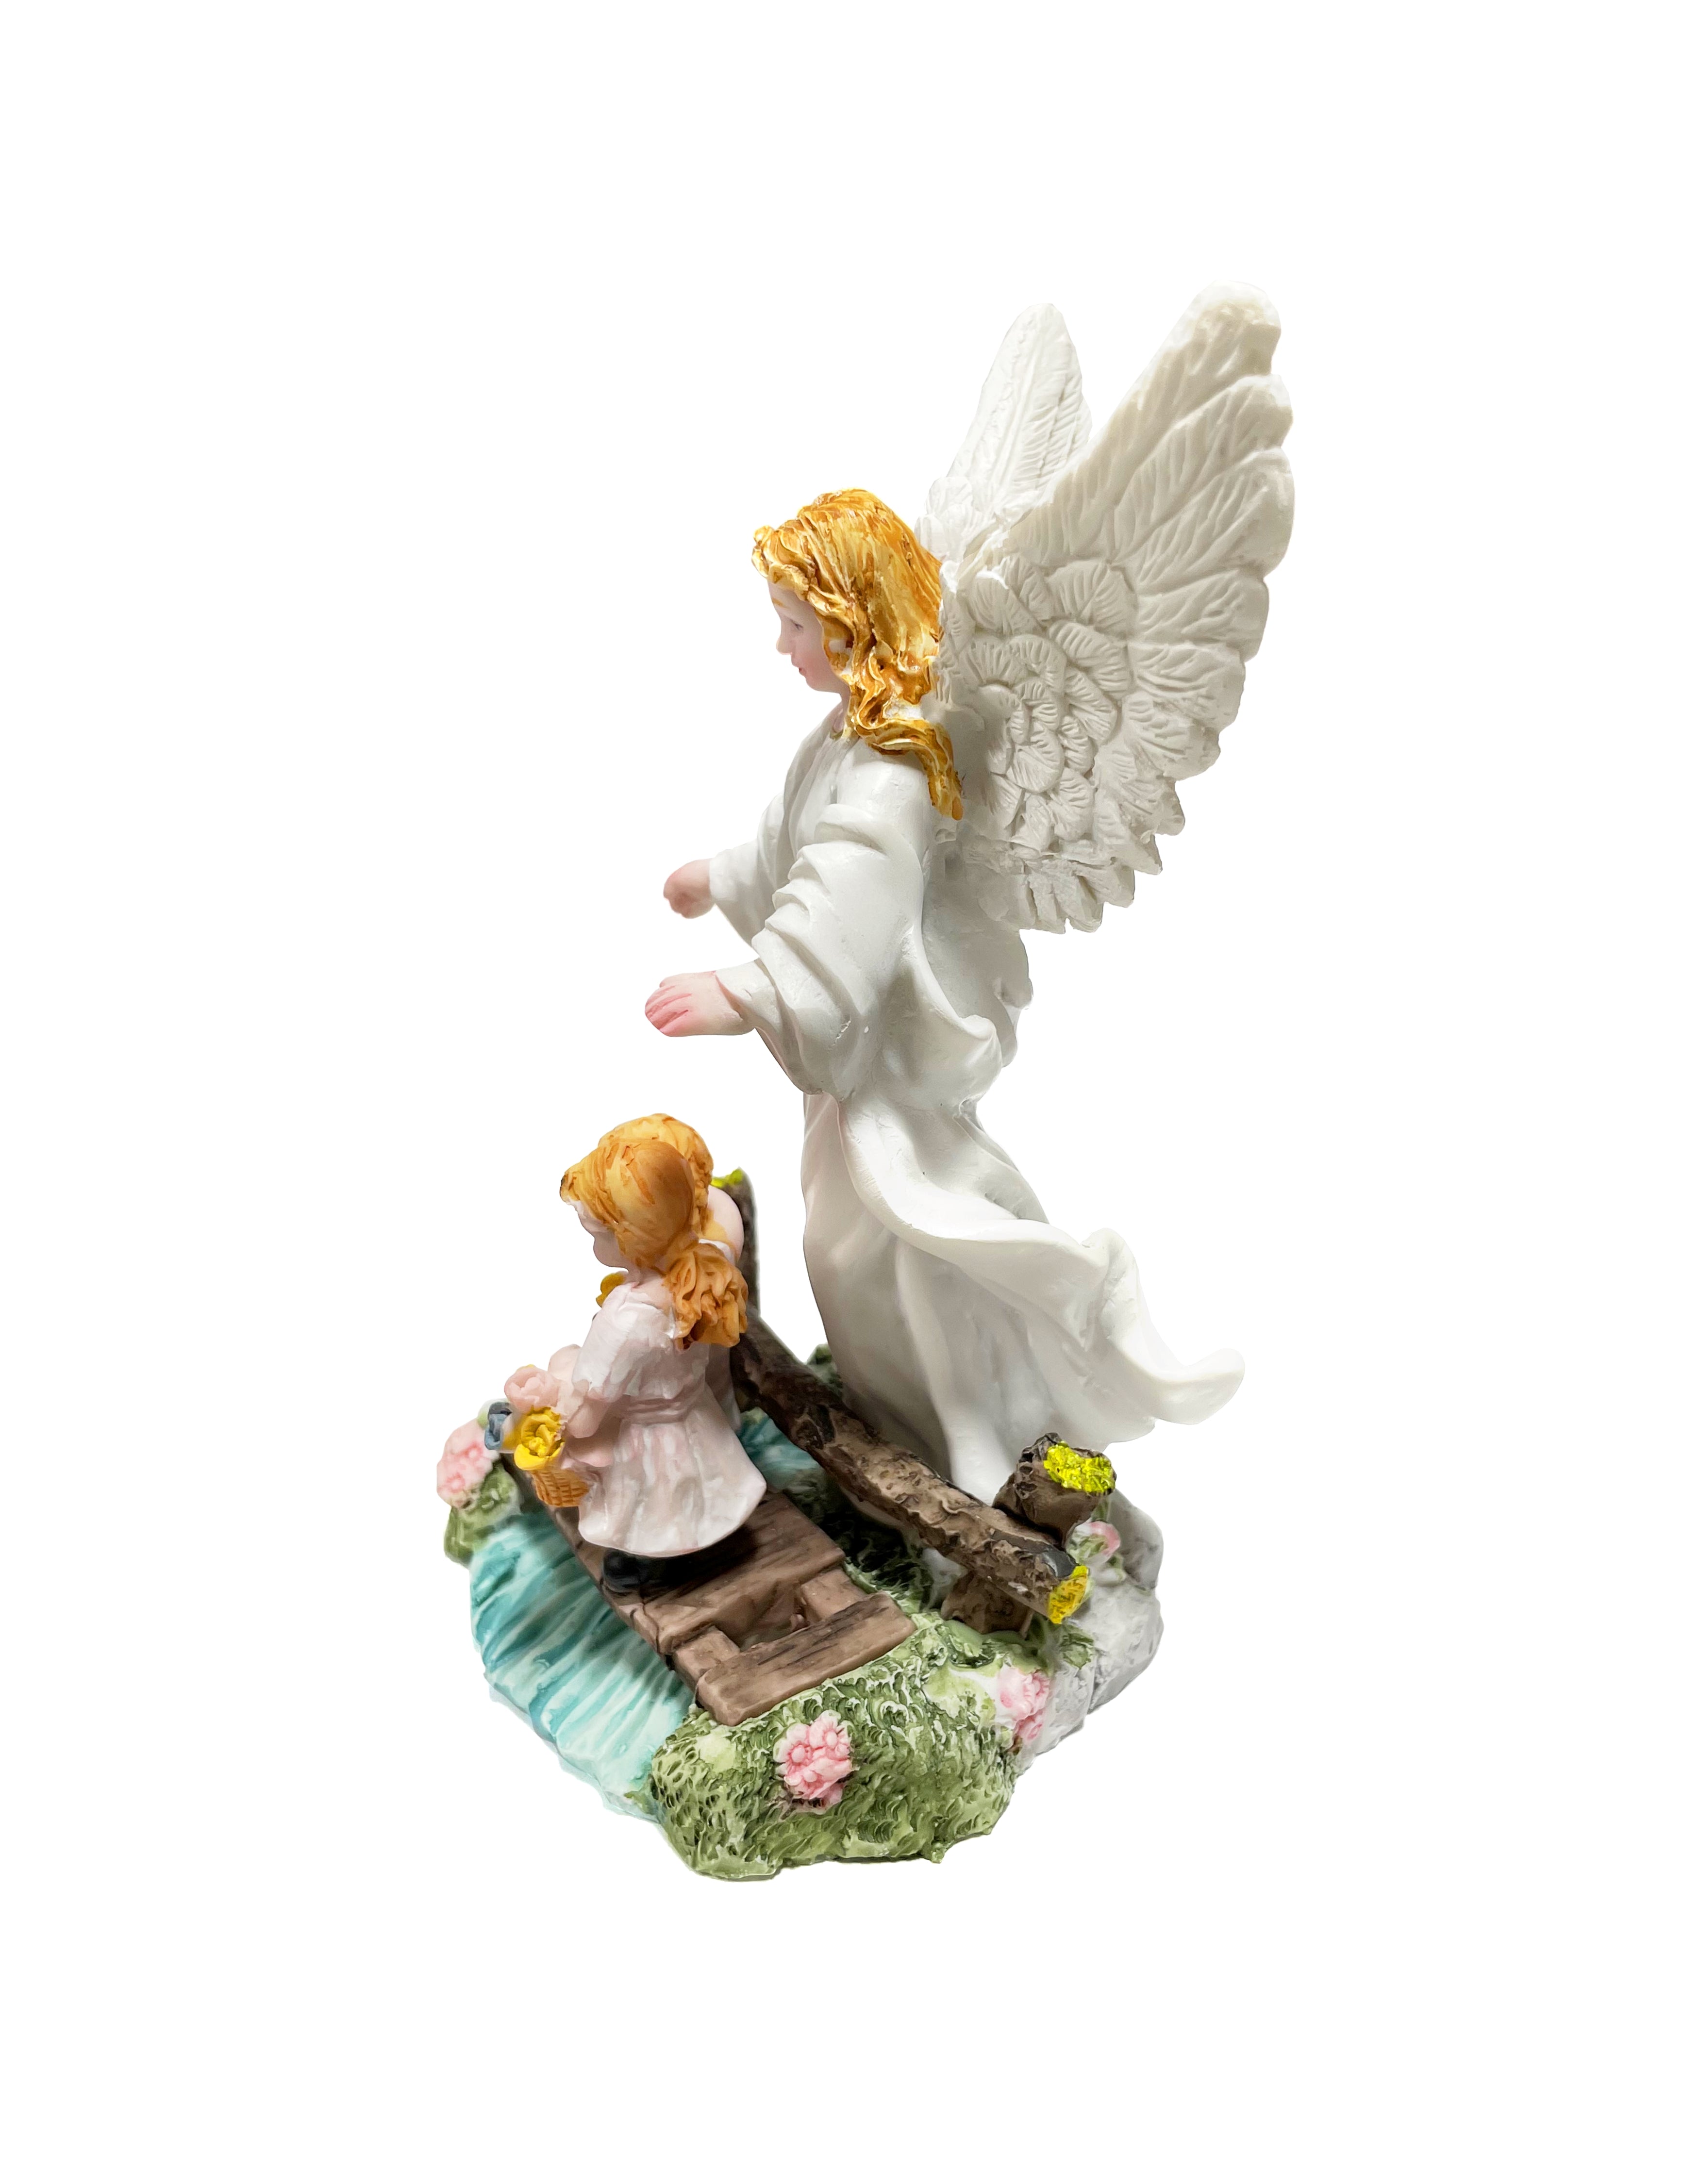 Religious statue of the Guardian Angel 5" height